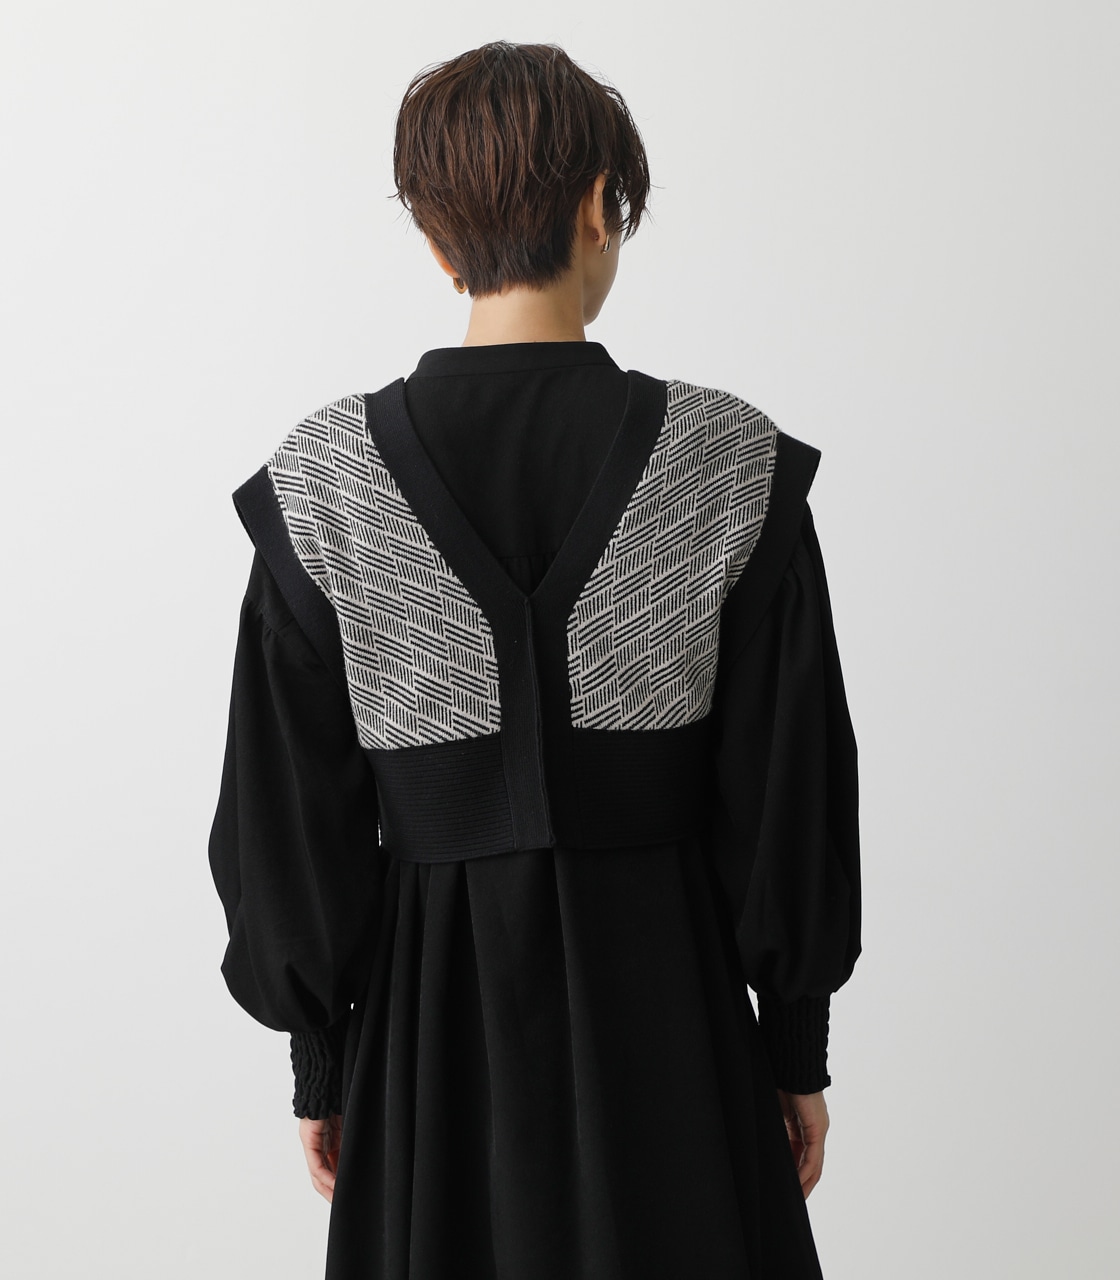 PATTERN COMPACT KNIT VEST/パターンコンパクトニットベスト 詳細画像 柄BLK 7